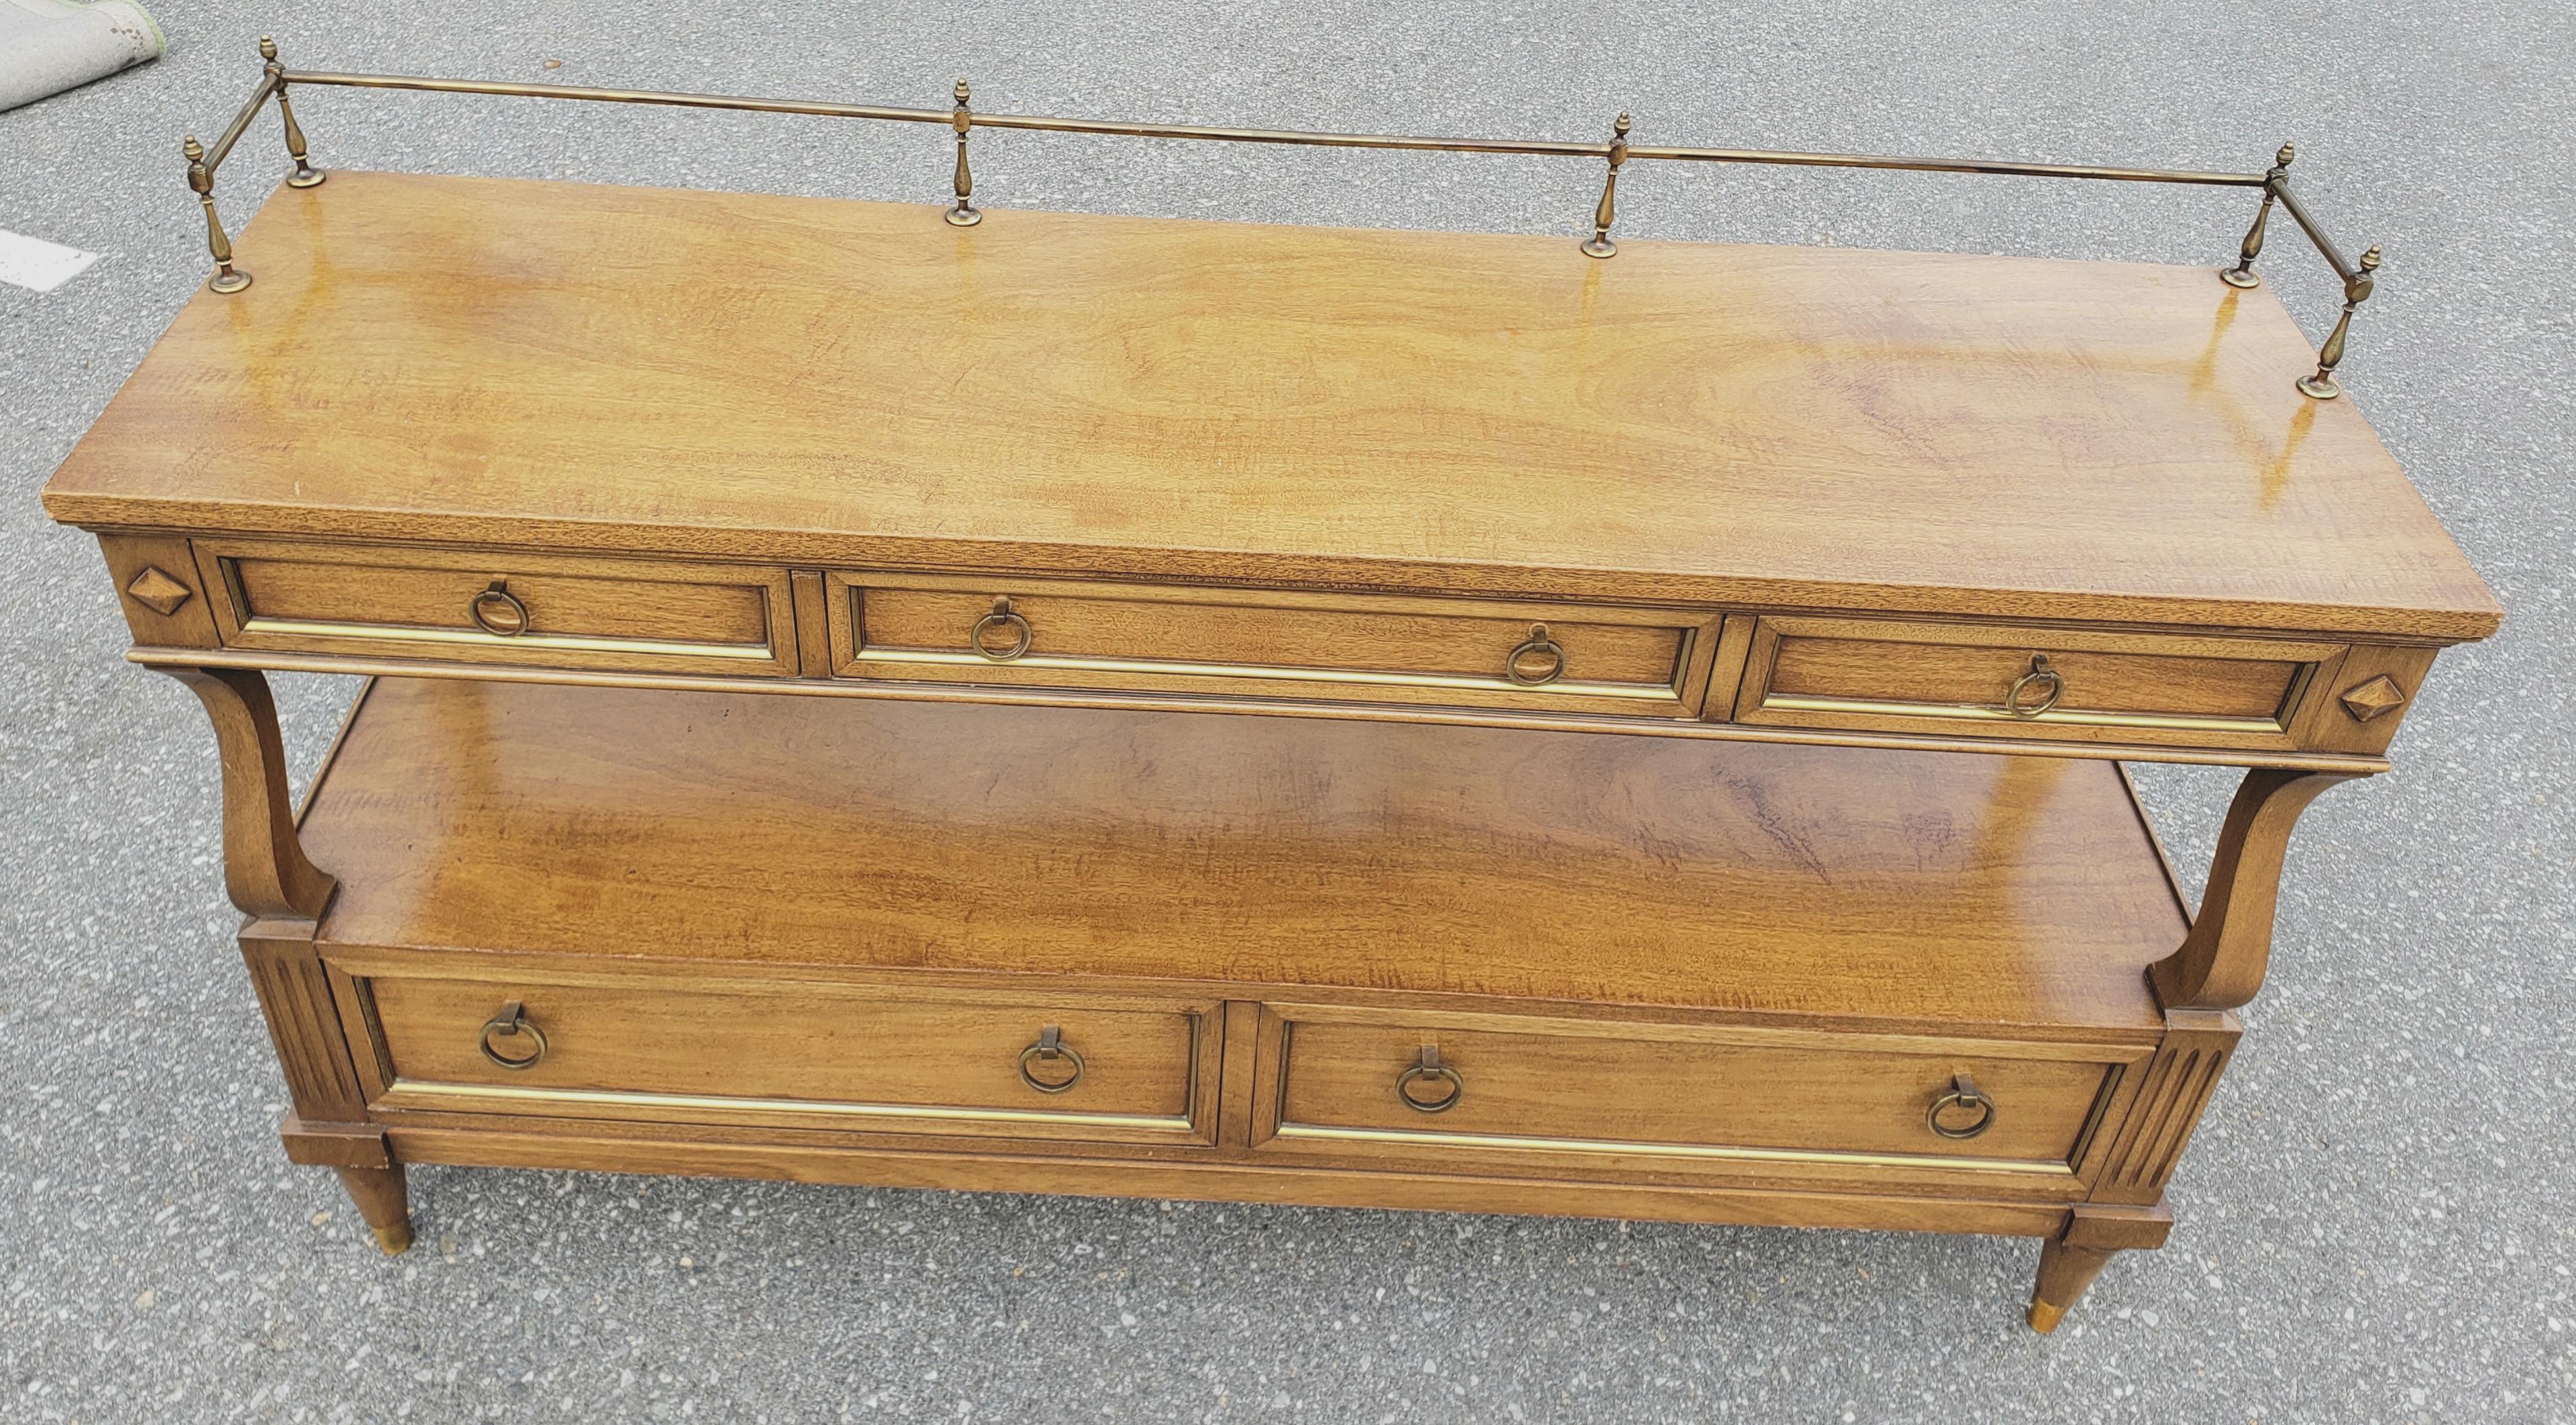 De Bournais French Neoclassical Tiered Brass Mounted Galleried Walnut Sideboard In Good Condition For Sale In Germantown, MD